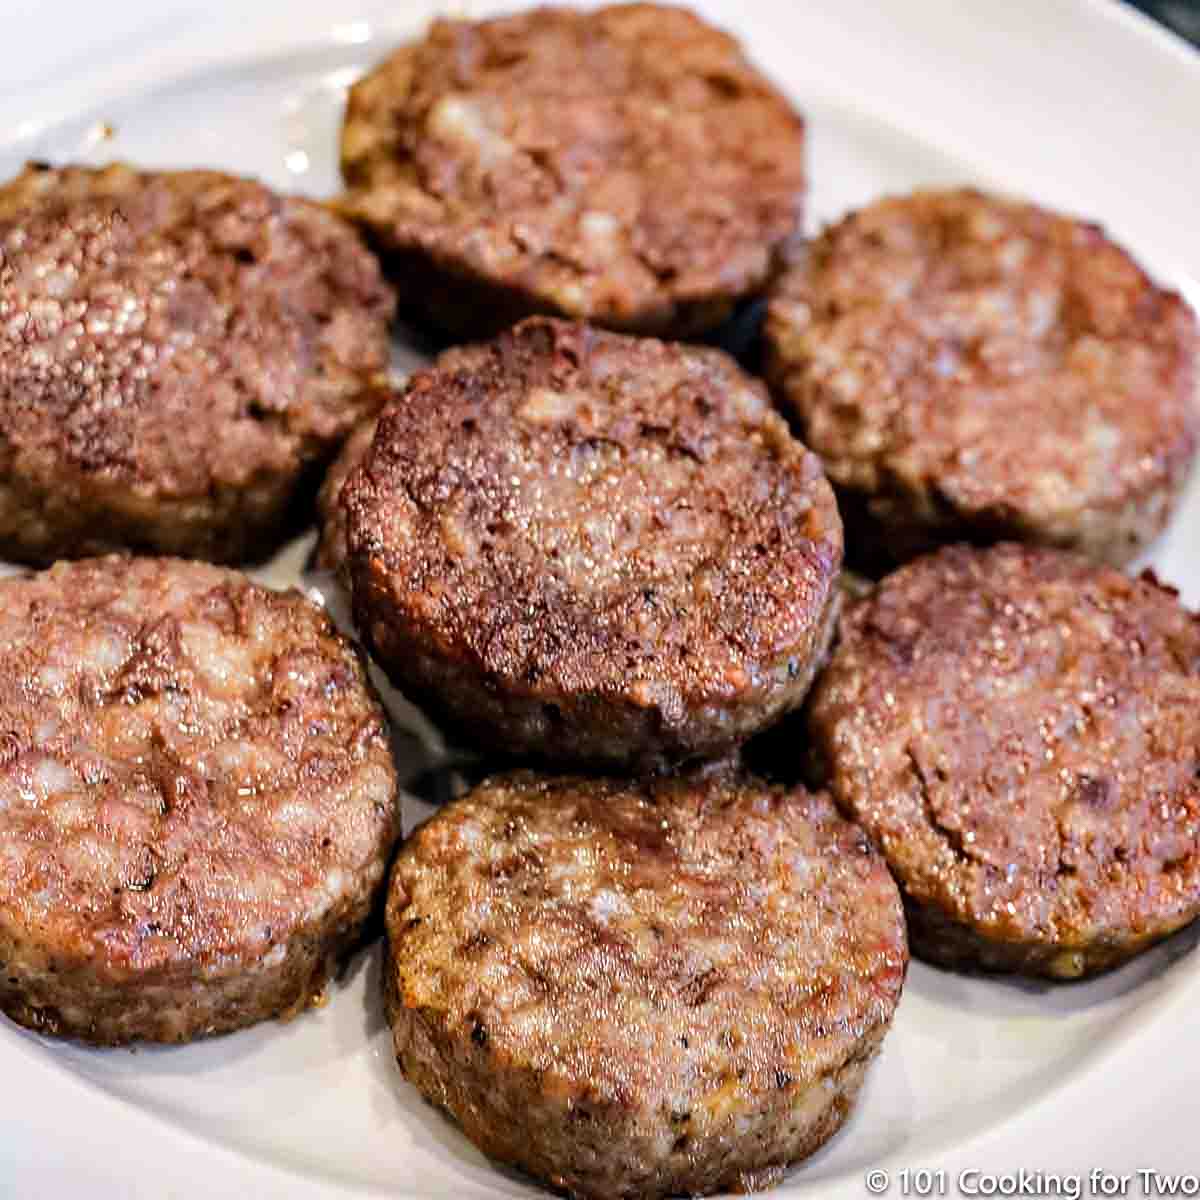 Close up image of a well done round piece of breakfast sausage on a pile of others